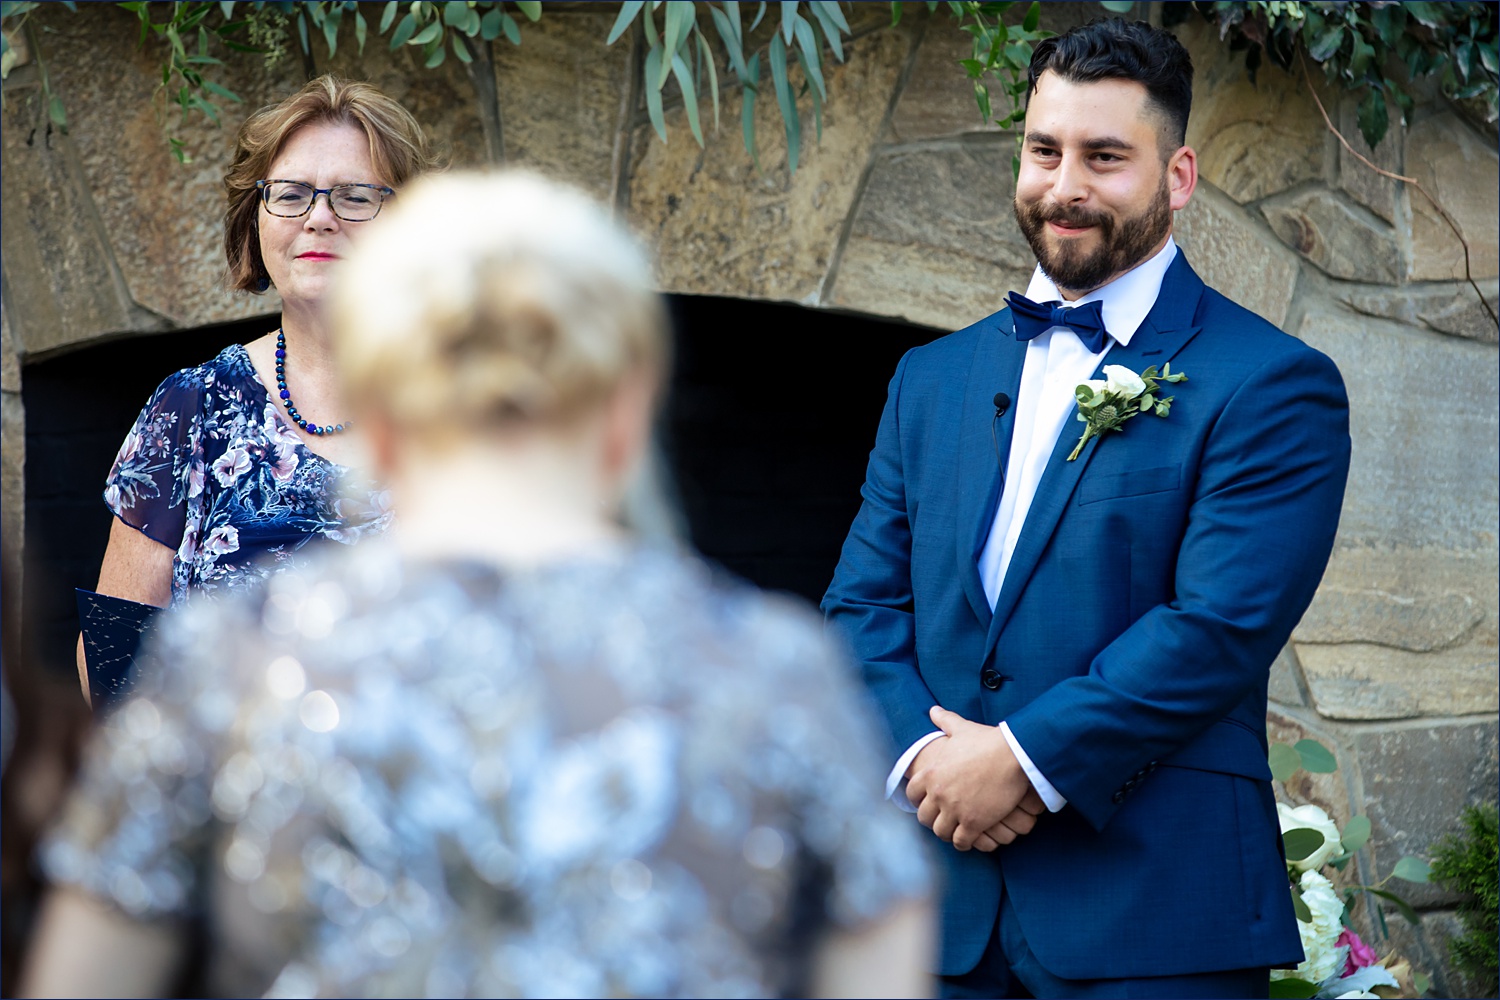 The groom sees the bride for the first time at the backyard wedding day